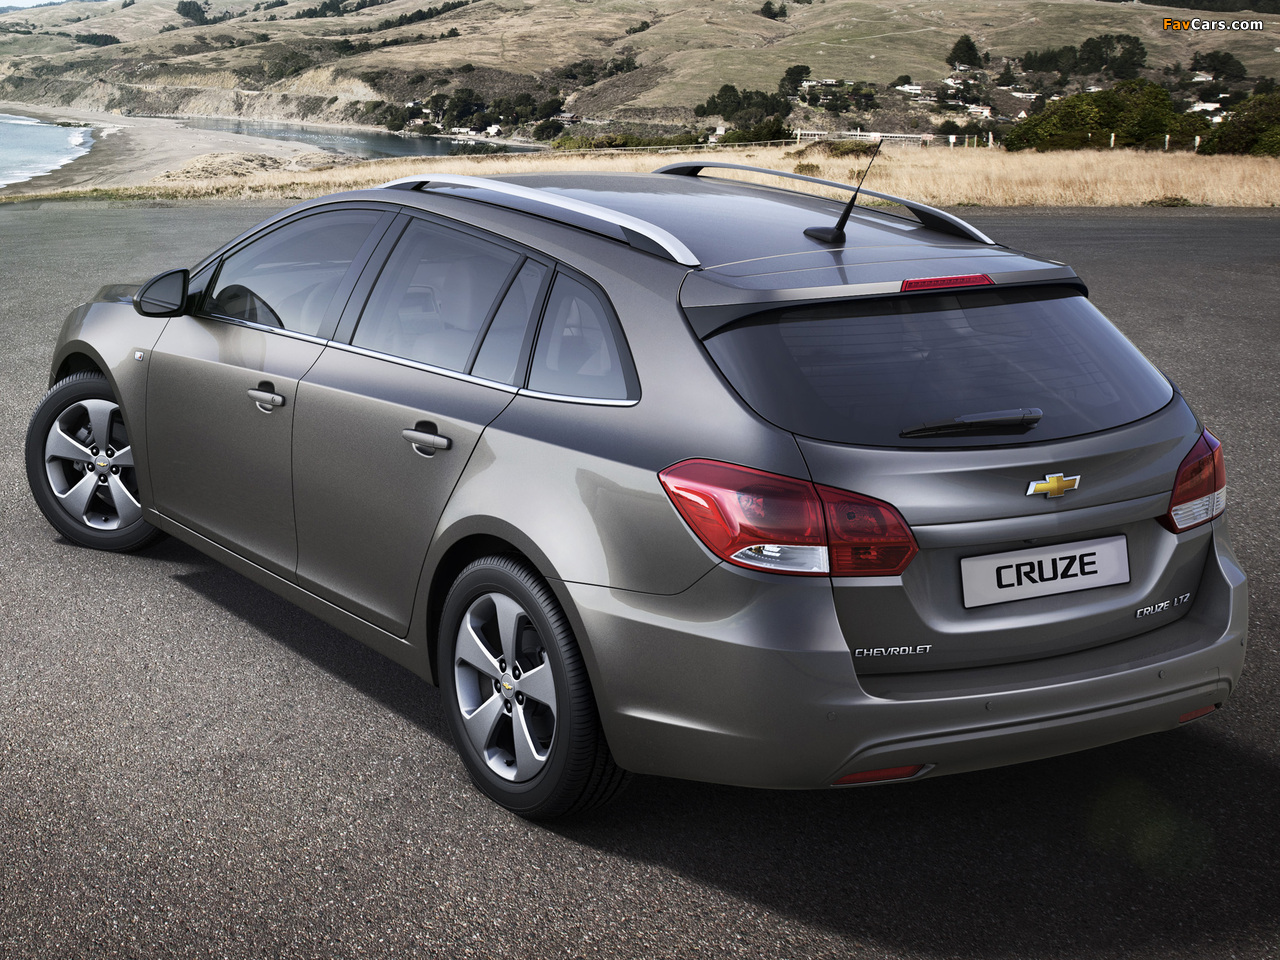 Chevrolet Cruze Station Wagon (J300) 2012 pictures (1280 x 960)